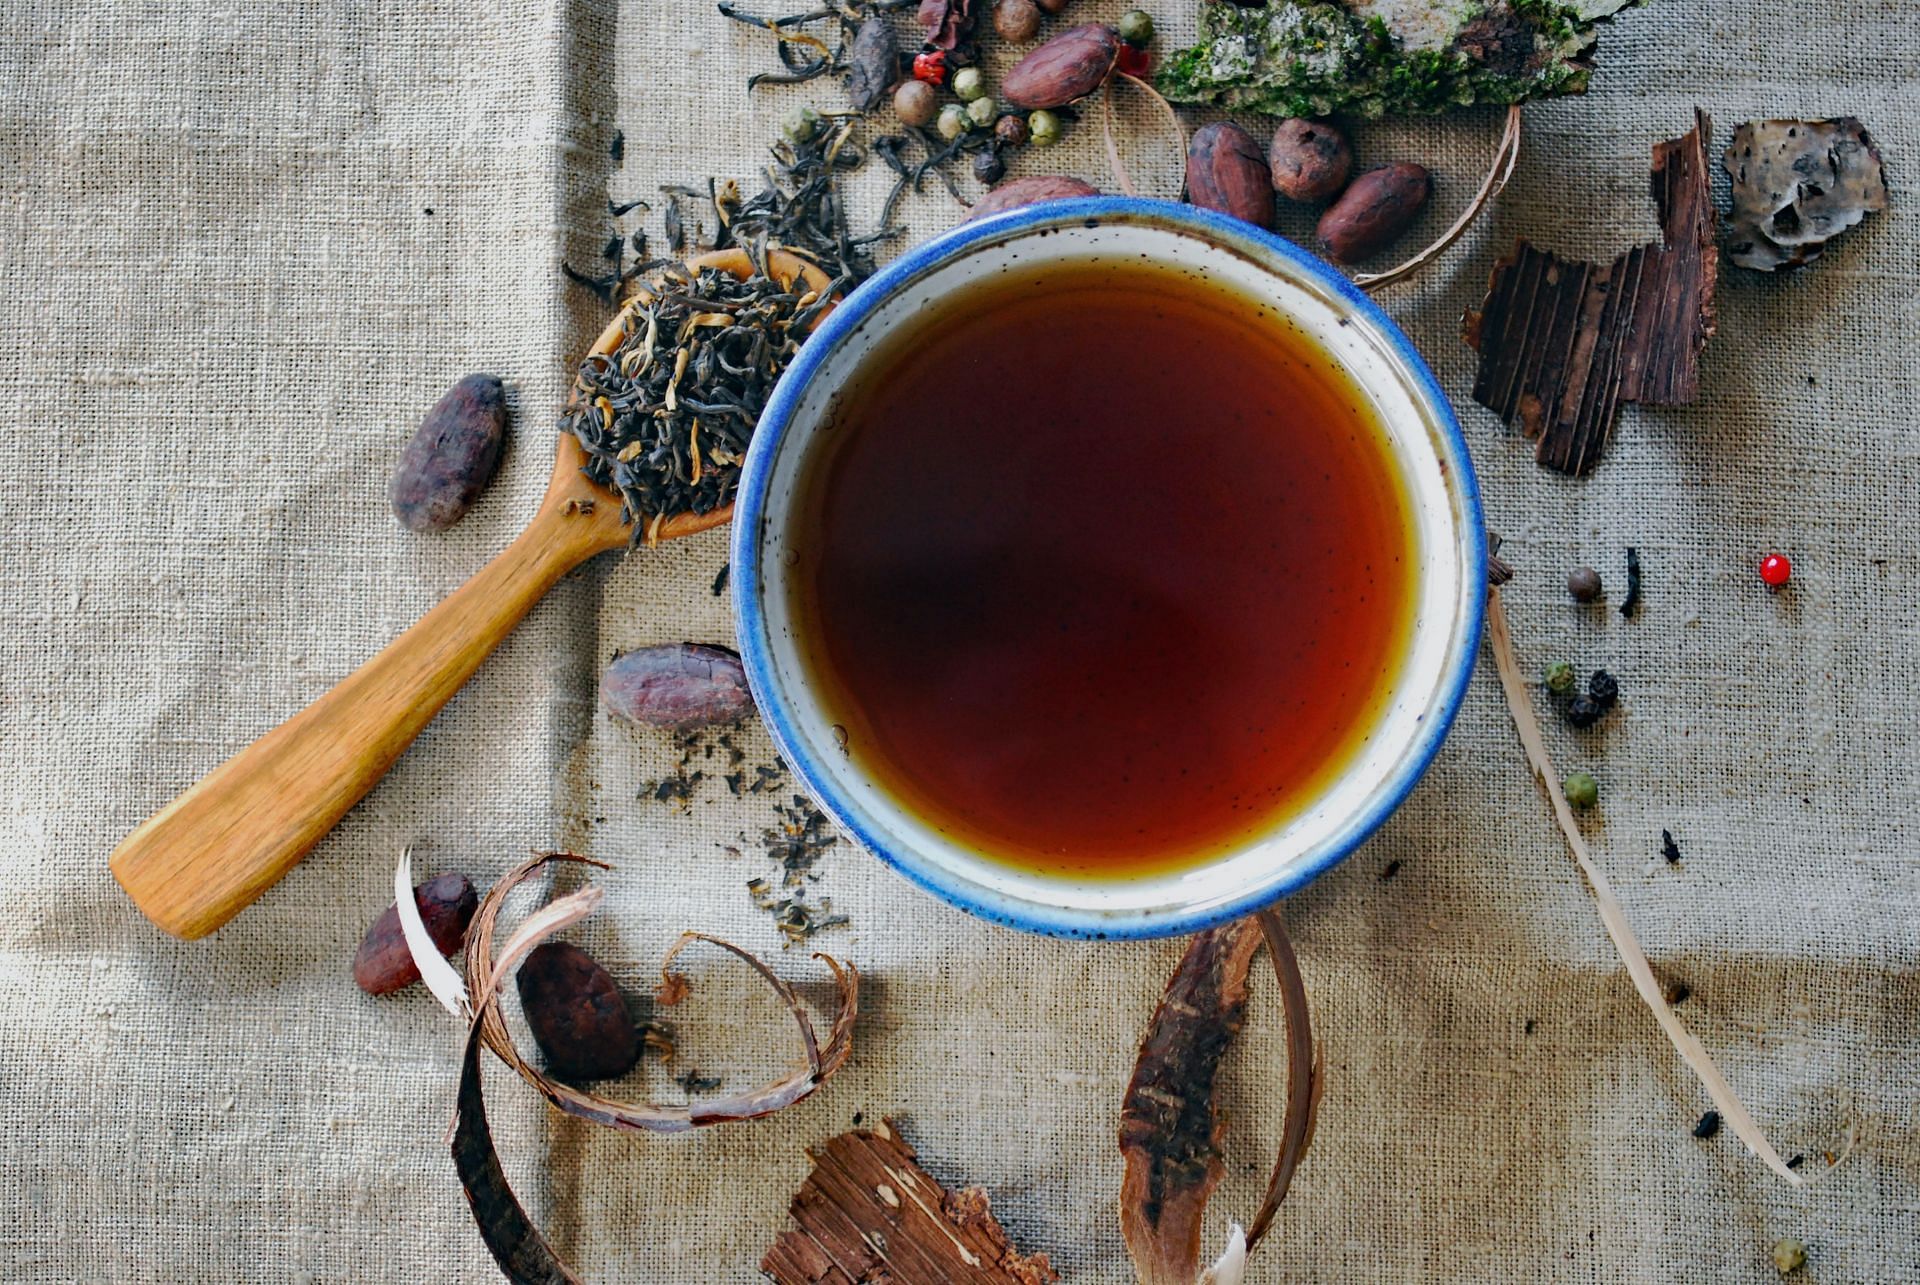 Drinking detox teas has become a common habit today for those looking to rid their bodies of toxins. (Image via Unsplash/ Drew Jemmett)